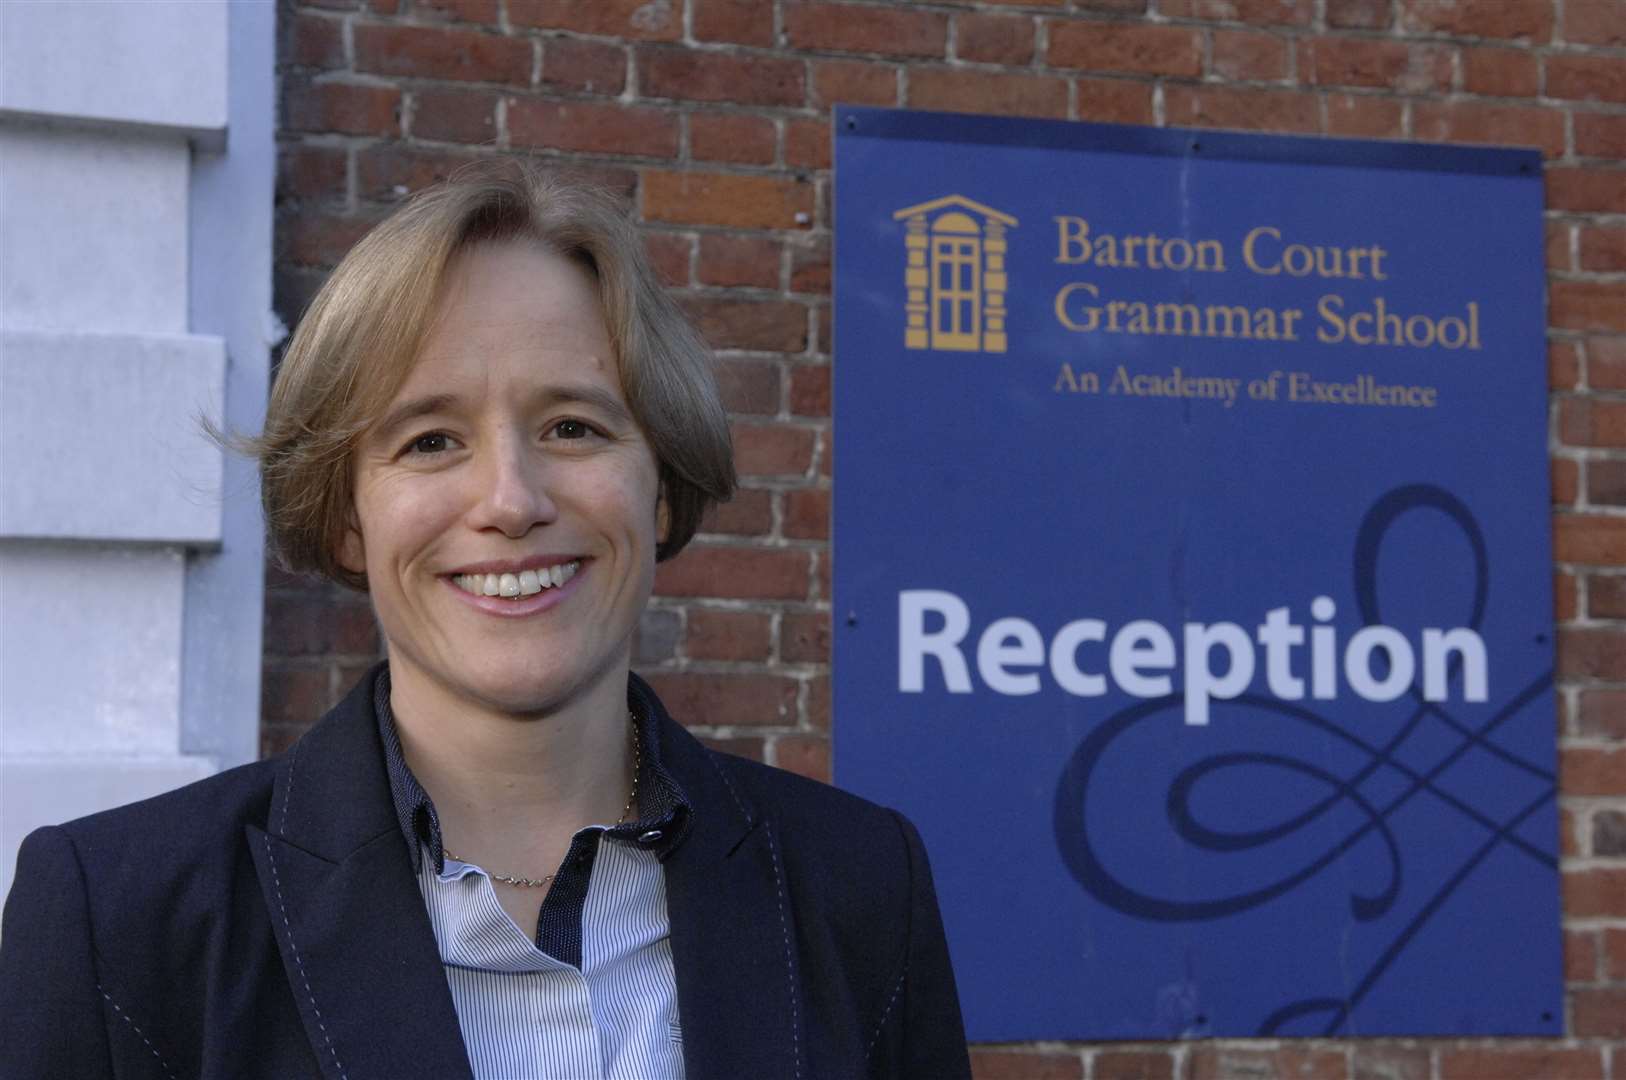 Kirstin Cardus, executive head teacher at Barton Court Grammar School, wrote to parents after McCarthy was charged